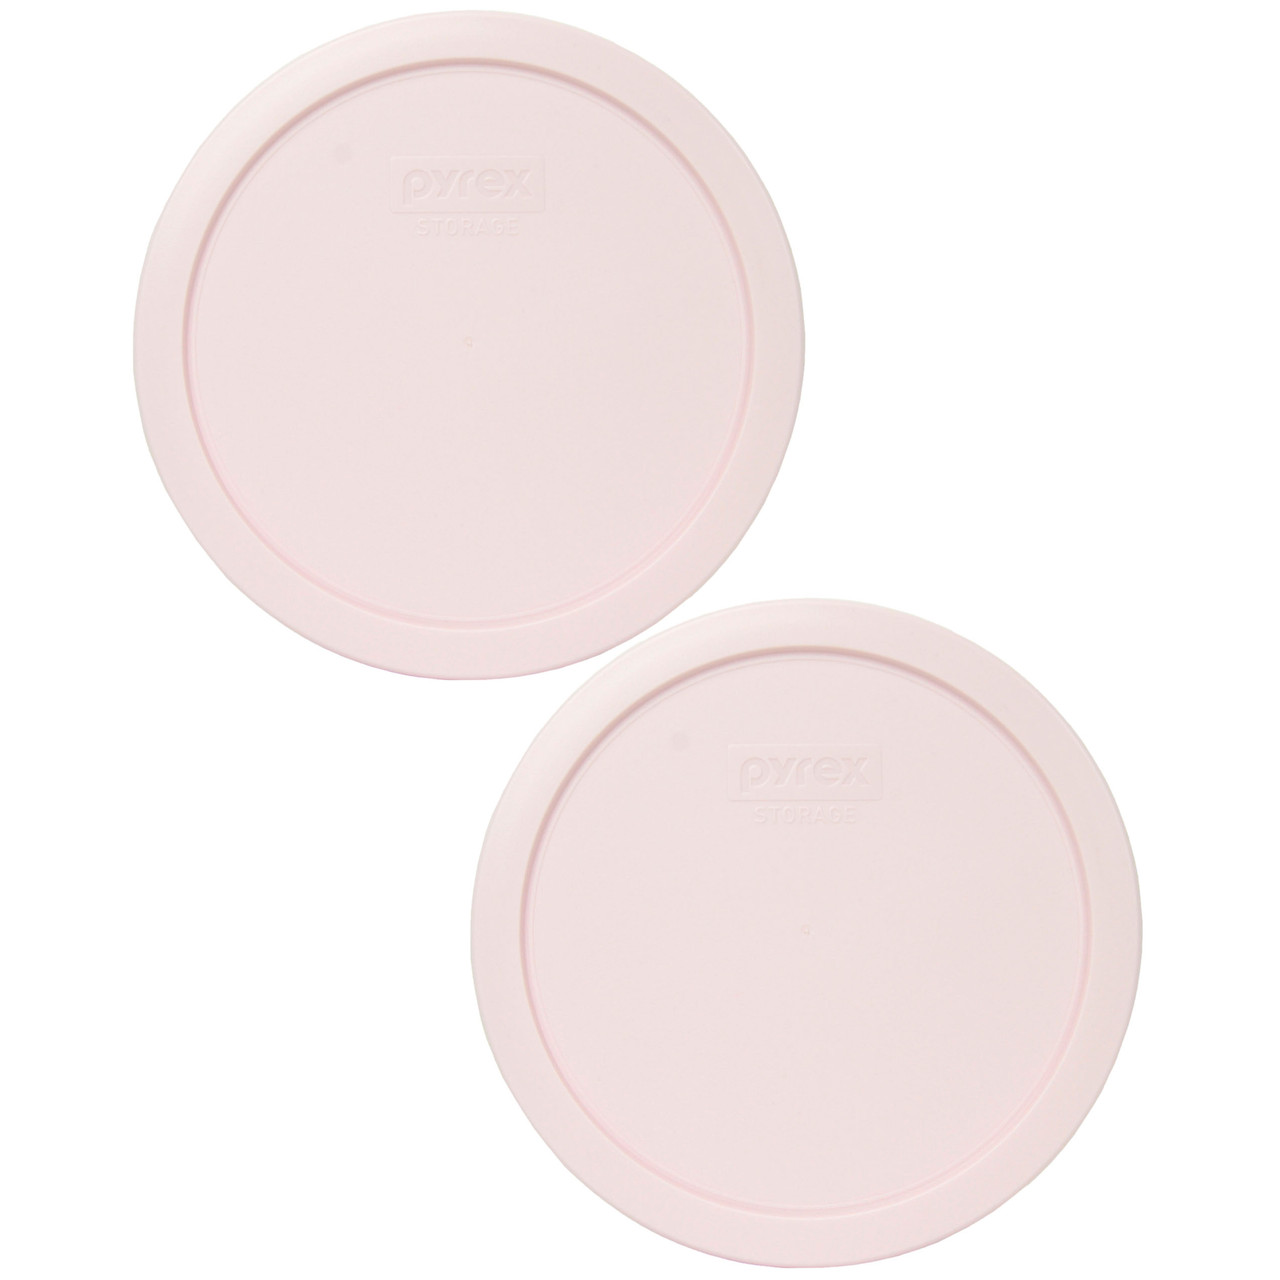 Pyrex 7203 7-Cup Round Glass Food Storage Bowl with 7402-PC Loring Pink Plastic Lid Cover (4-Pack)